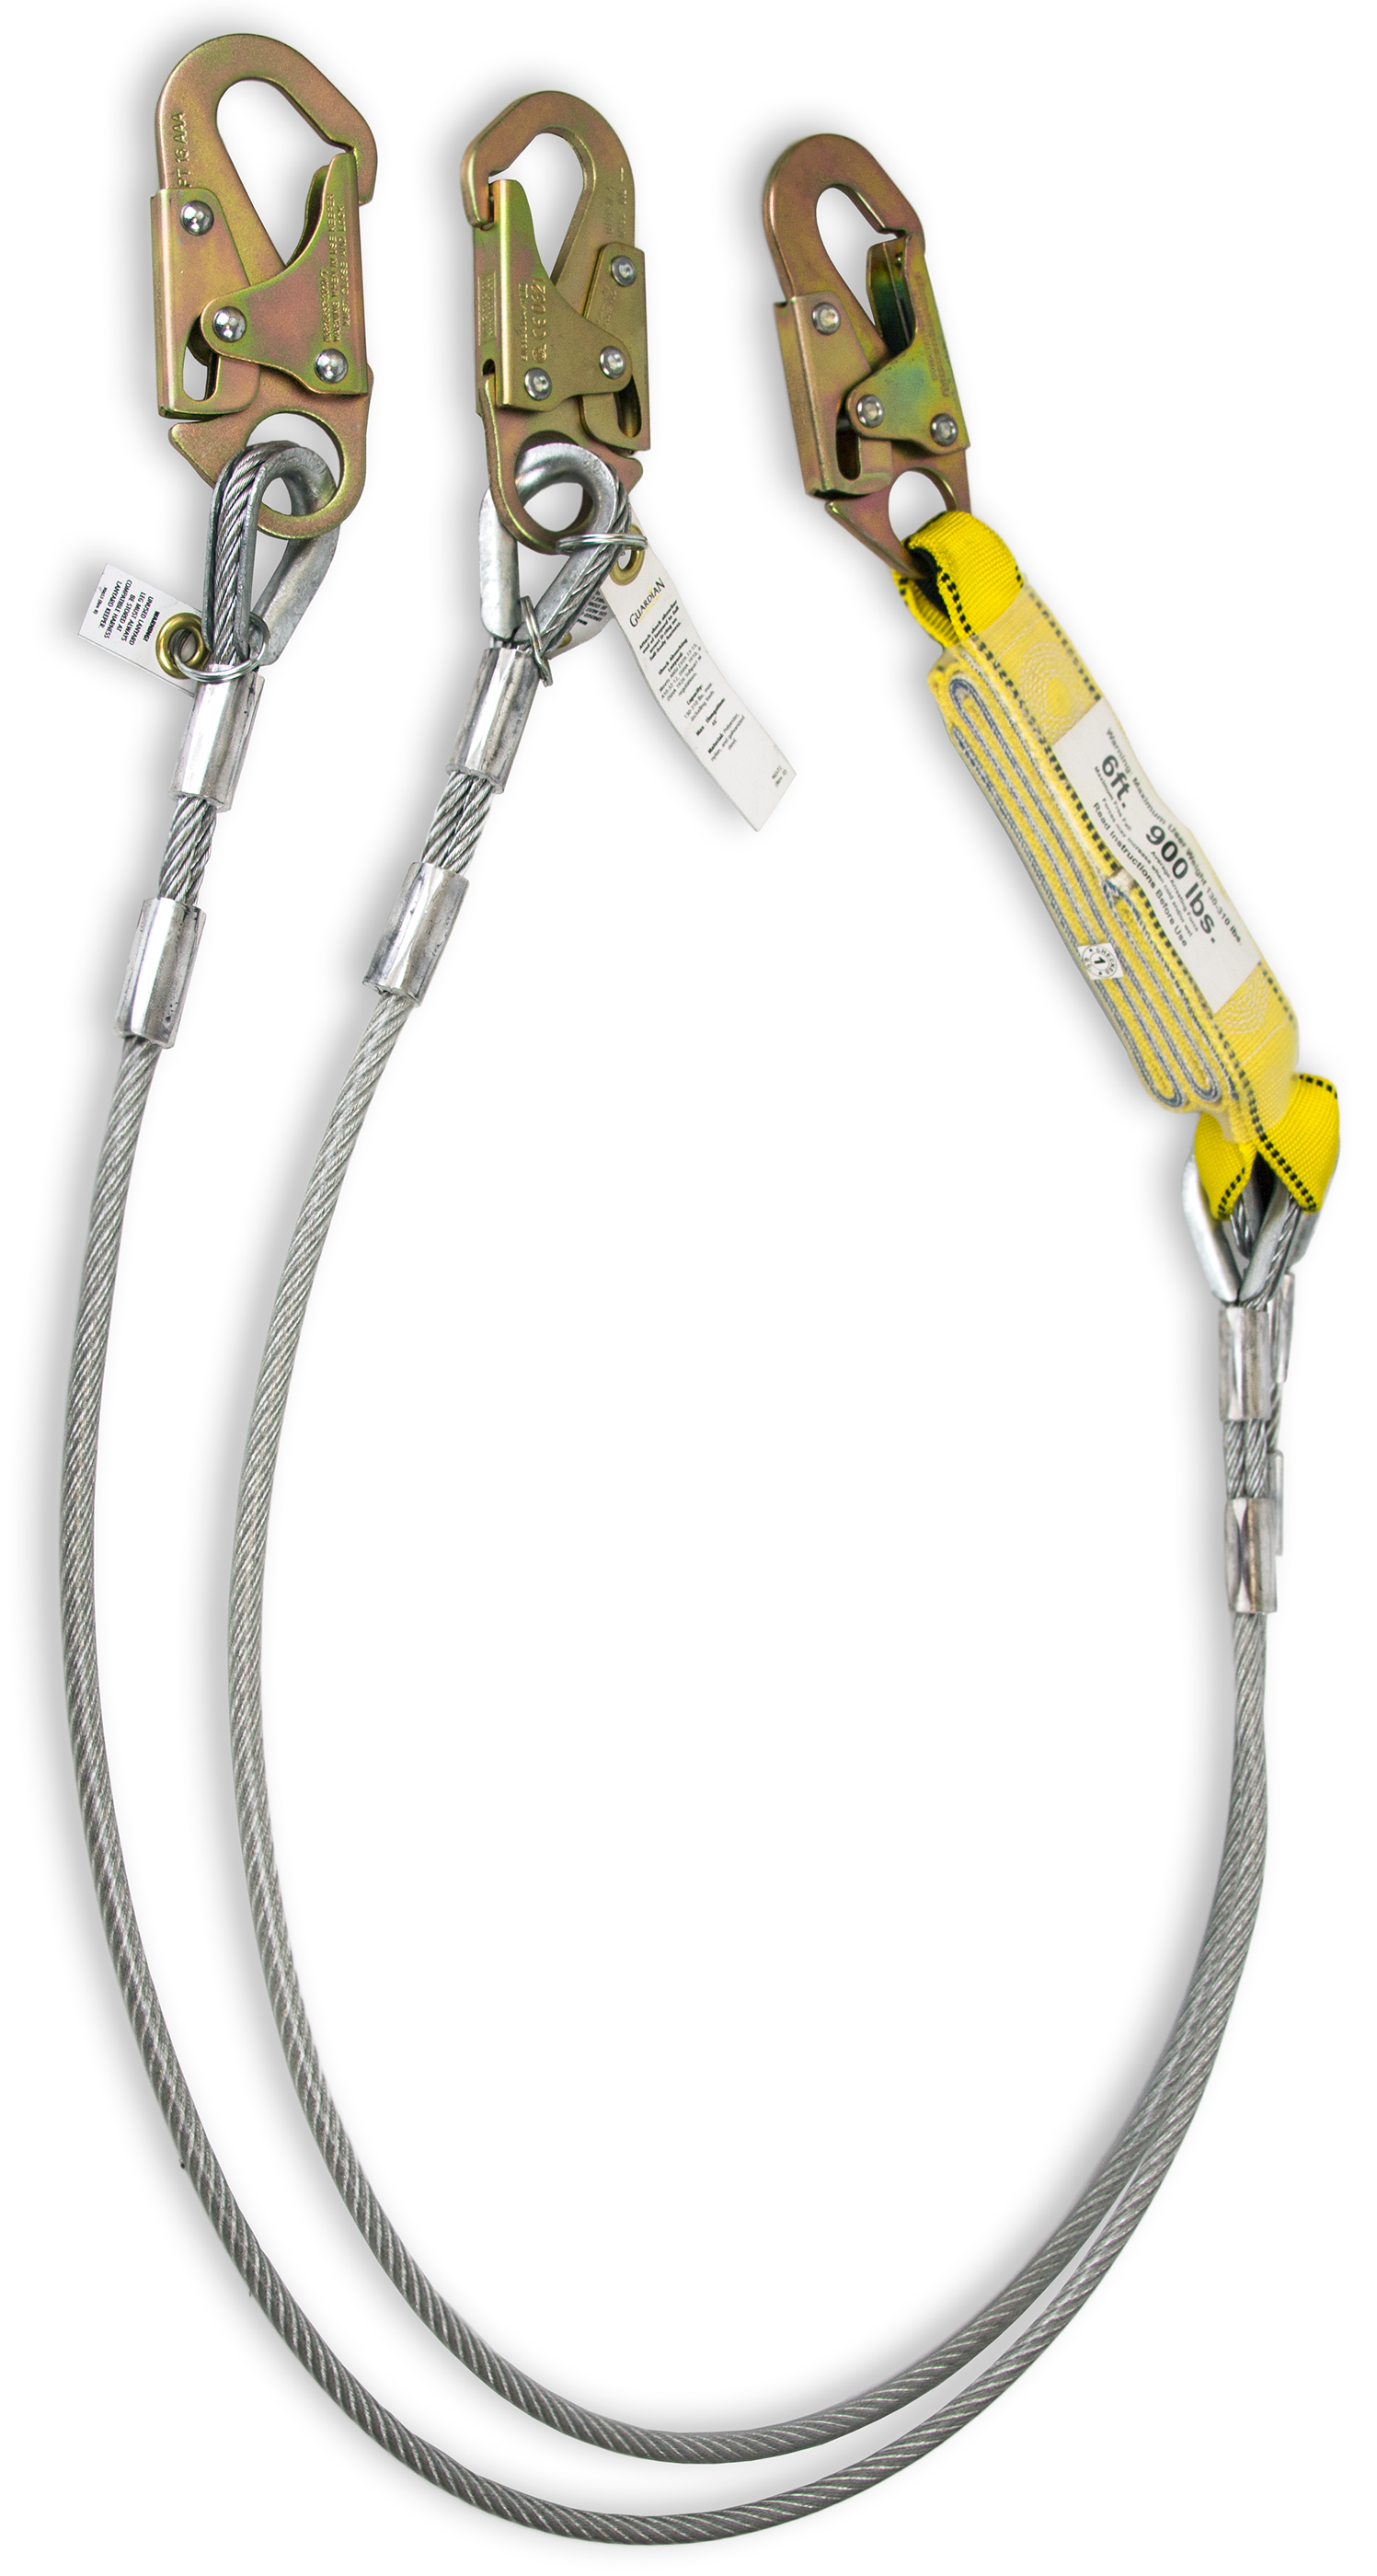 Guardian Fall Protection 01241 6-Foot Double Leg Cable Lanyard with Shock Absorber